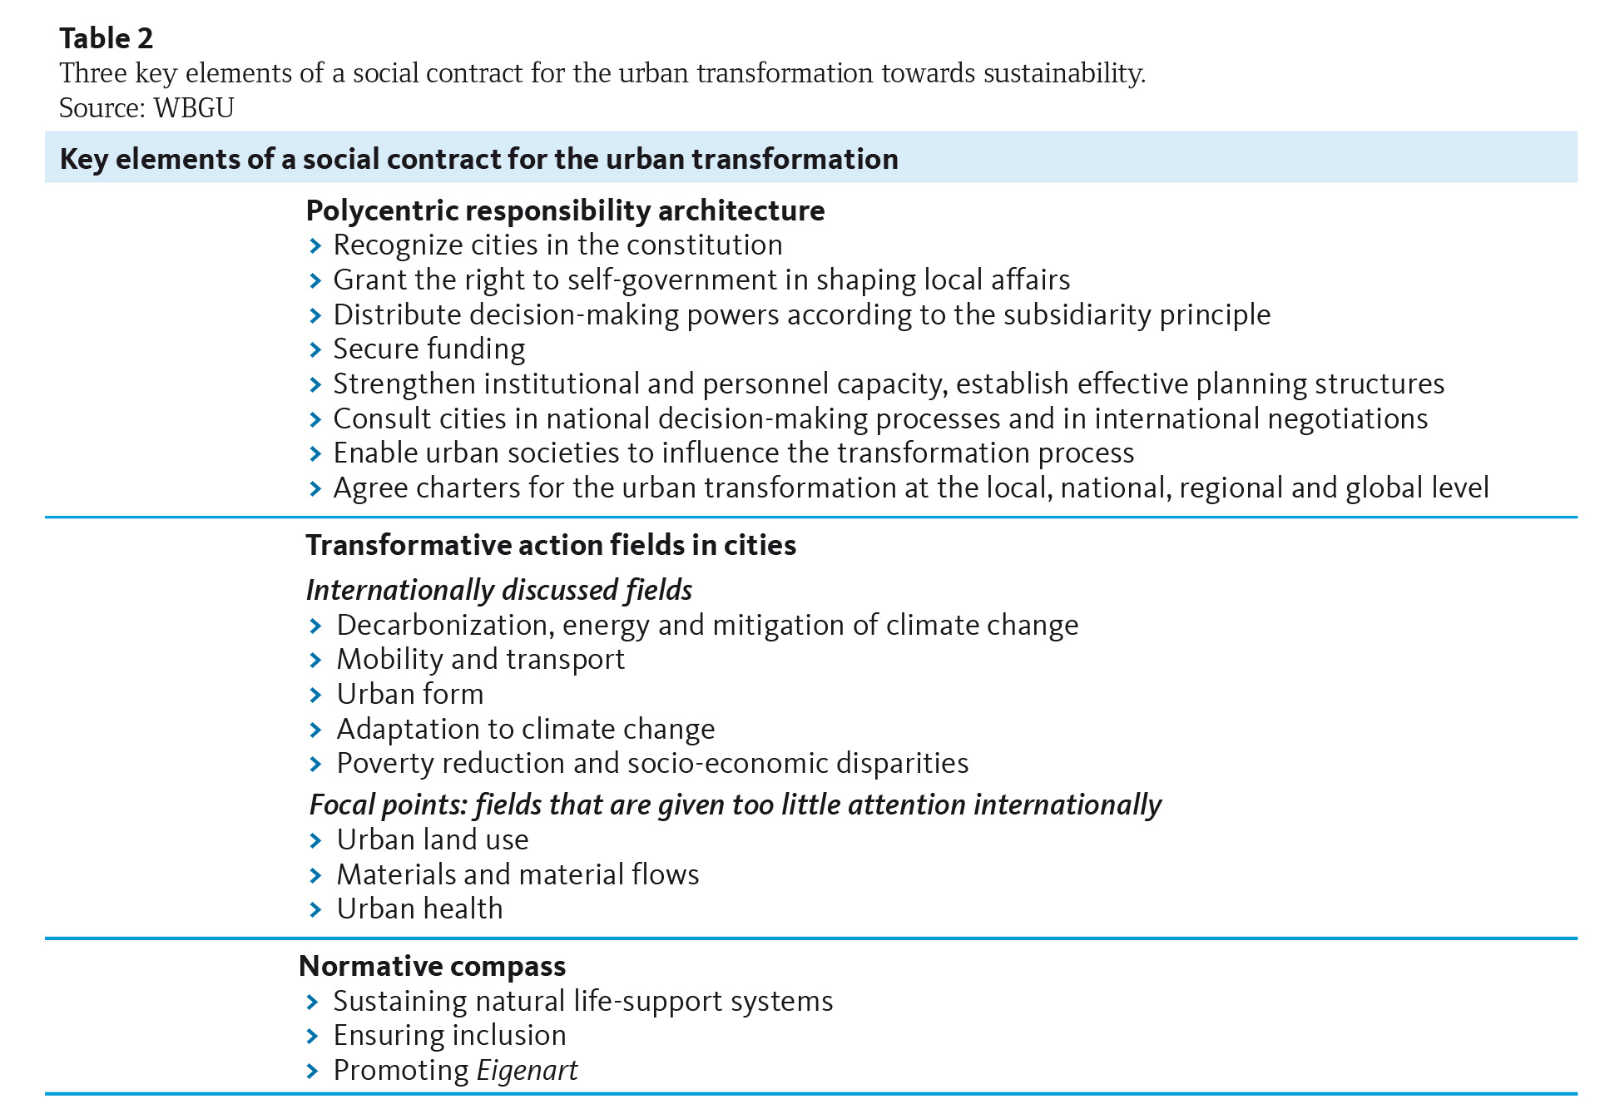 Key elements of a social contract for the urban transformation towards sustainability.